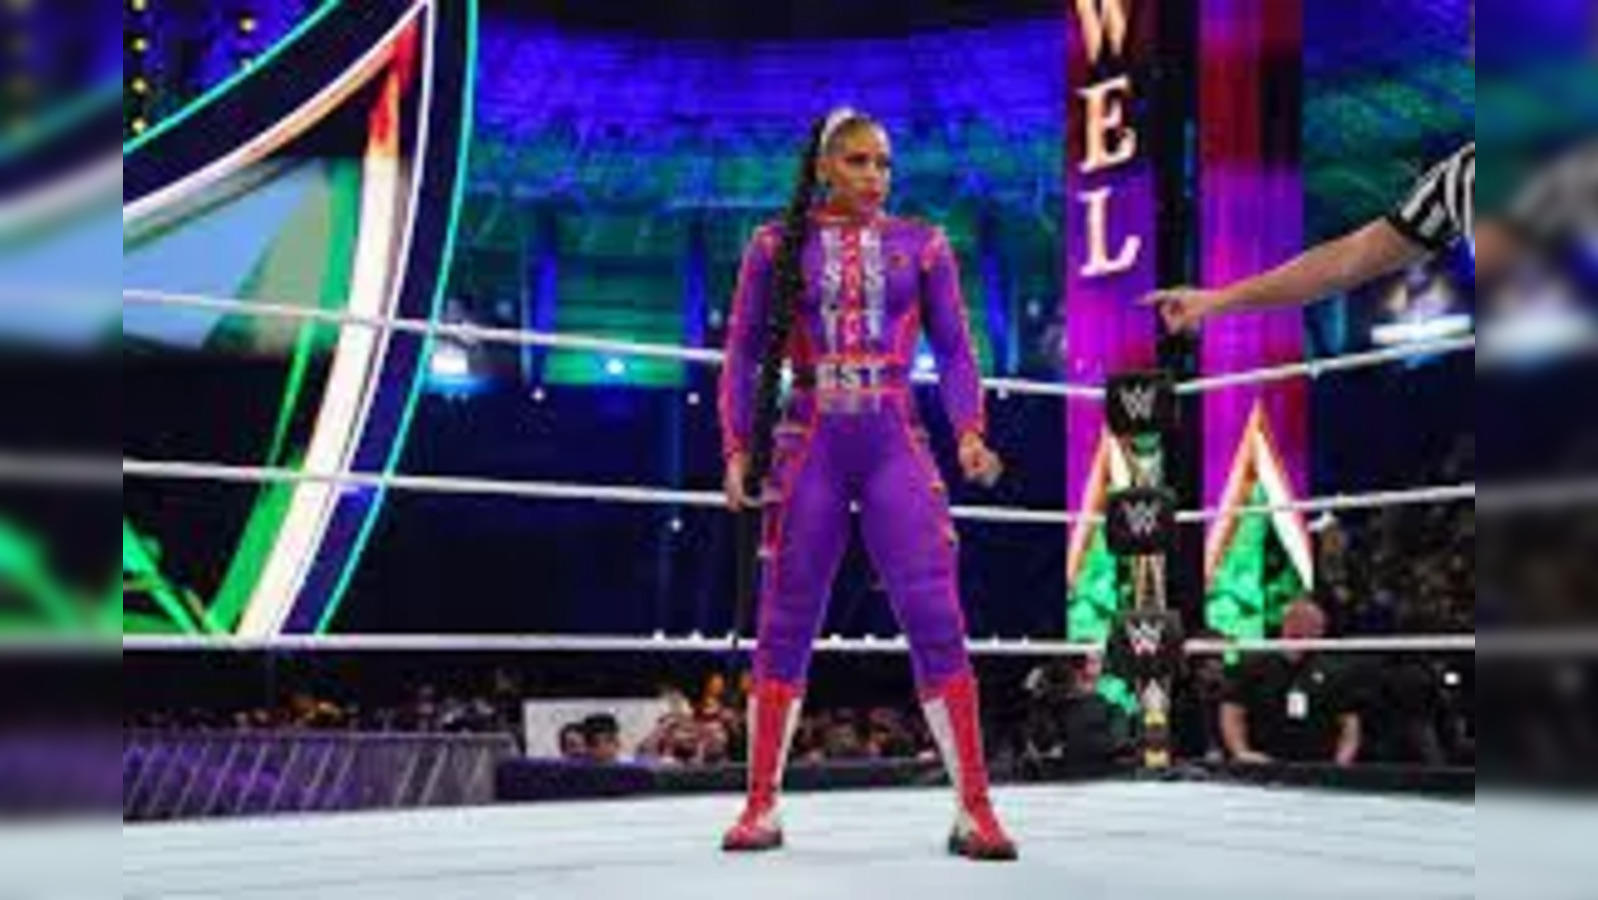 bianca belair: WWE superstar Bianca Belair suffered wardrobe malfunction  before Crown Jewel match, here's what she said - The Economic Times